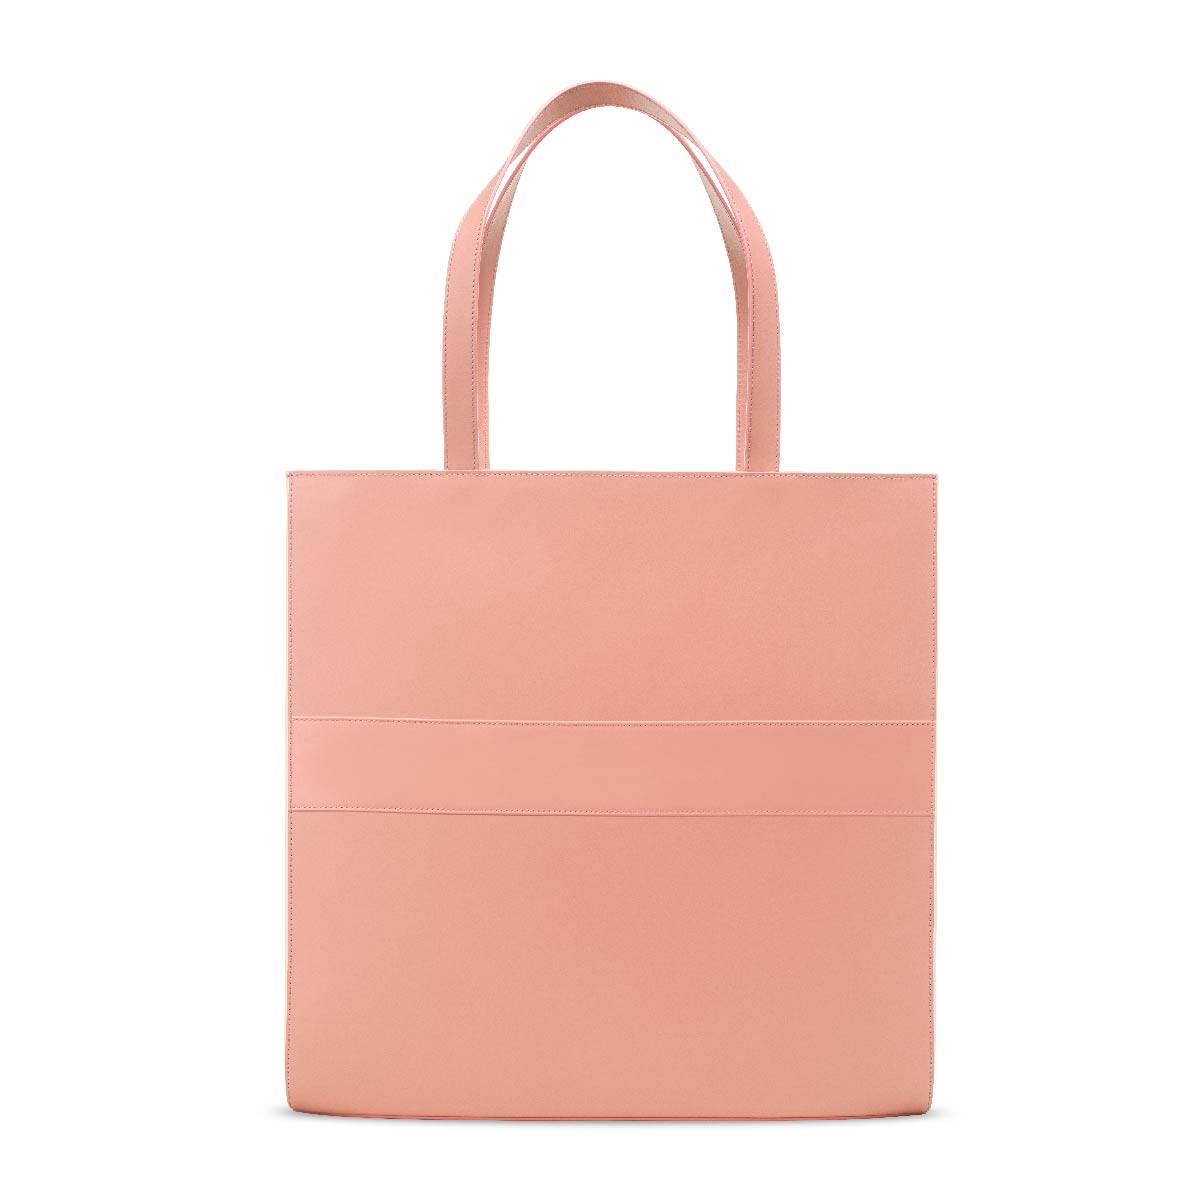 The Tote in Pink + Cream, with top handles, back view.